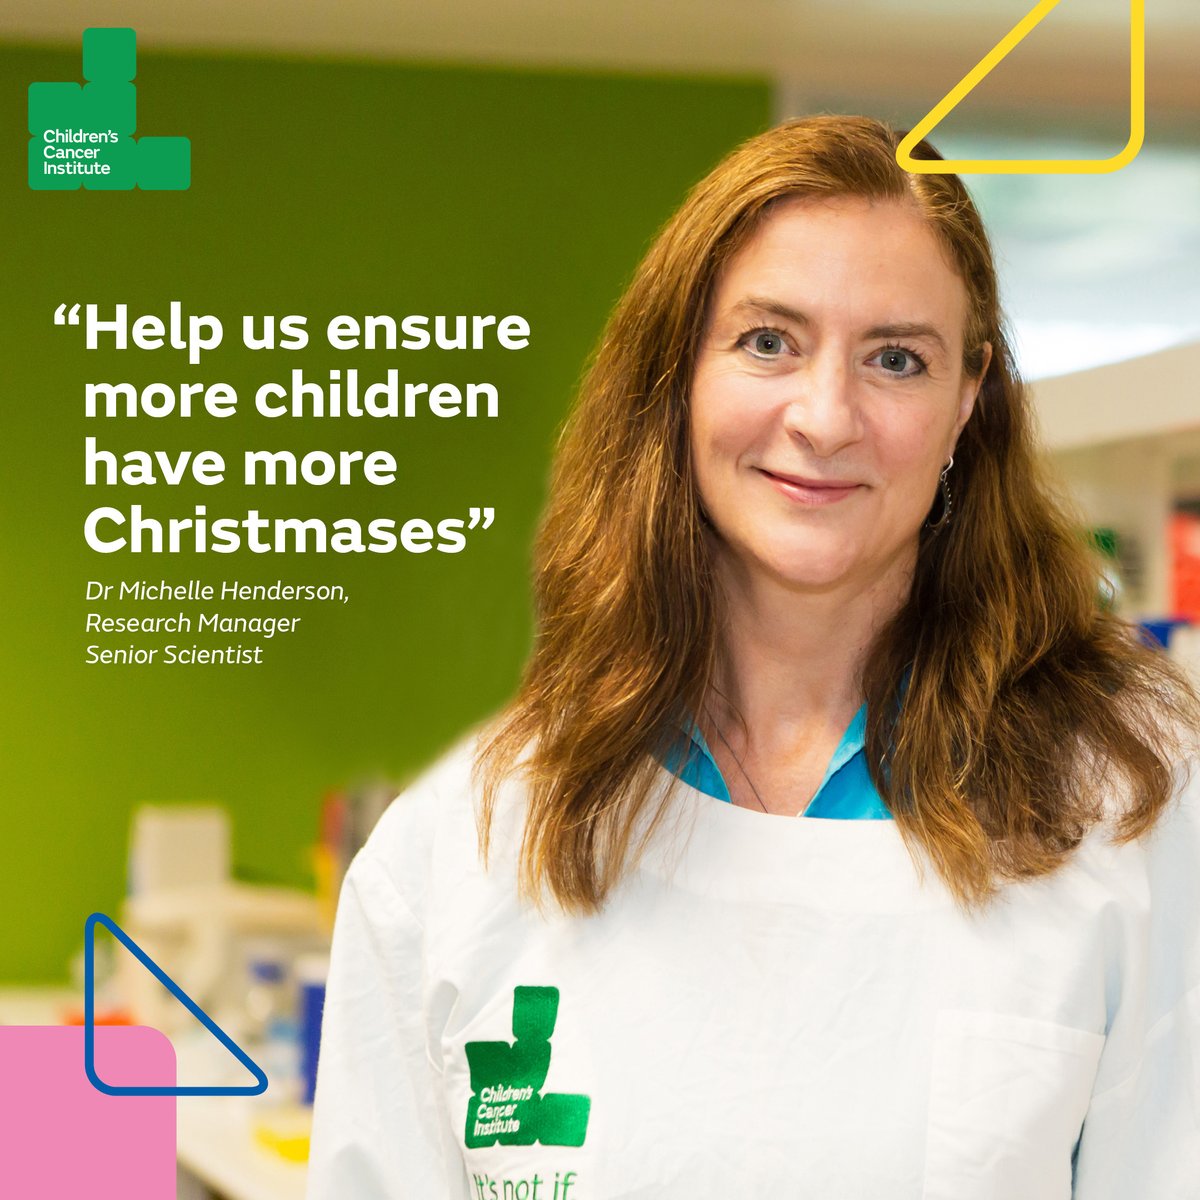 Cancer cuts life short for hundreds of children every year. Our mission at Children's Cancer Institute is to find a cure for all childhood cancer. Donate this Christmas ccia.support/Xmas2022

#ALifeShouldBeLong